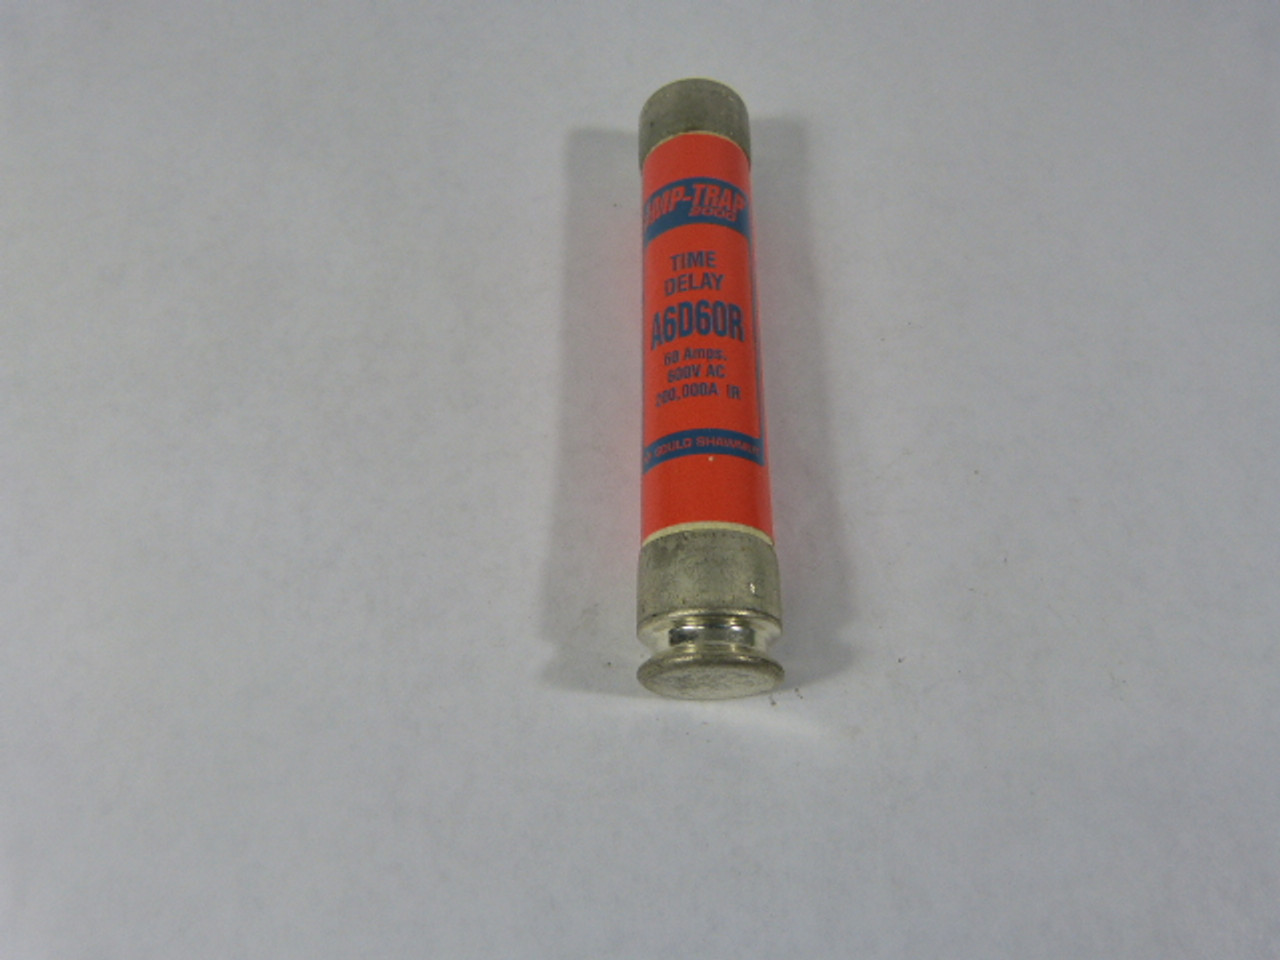 Gould Shawmut A6D60R Time Delay Fuse 60A 600V USED